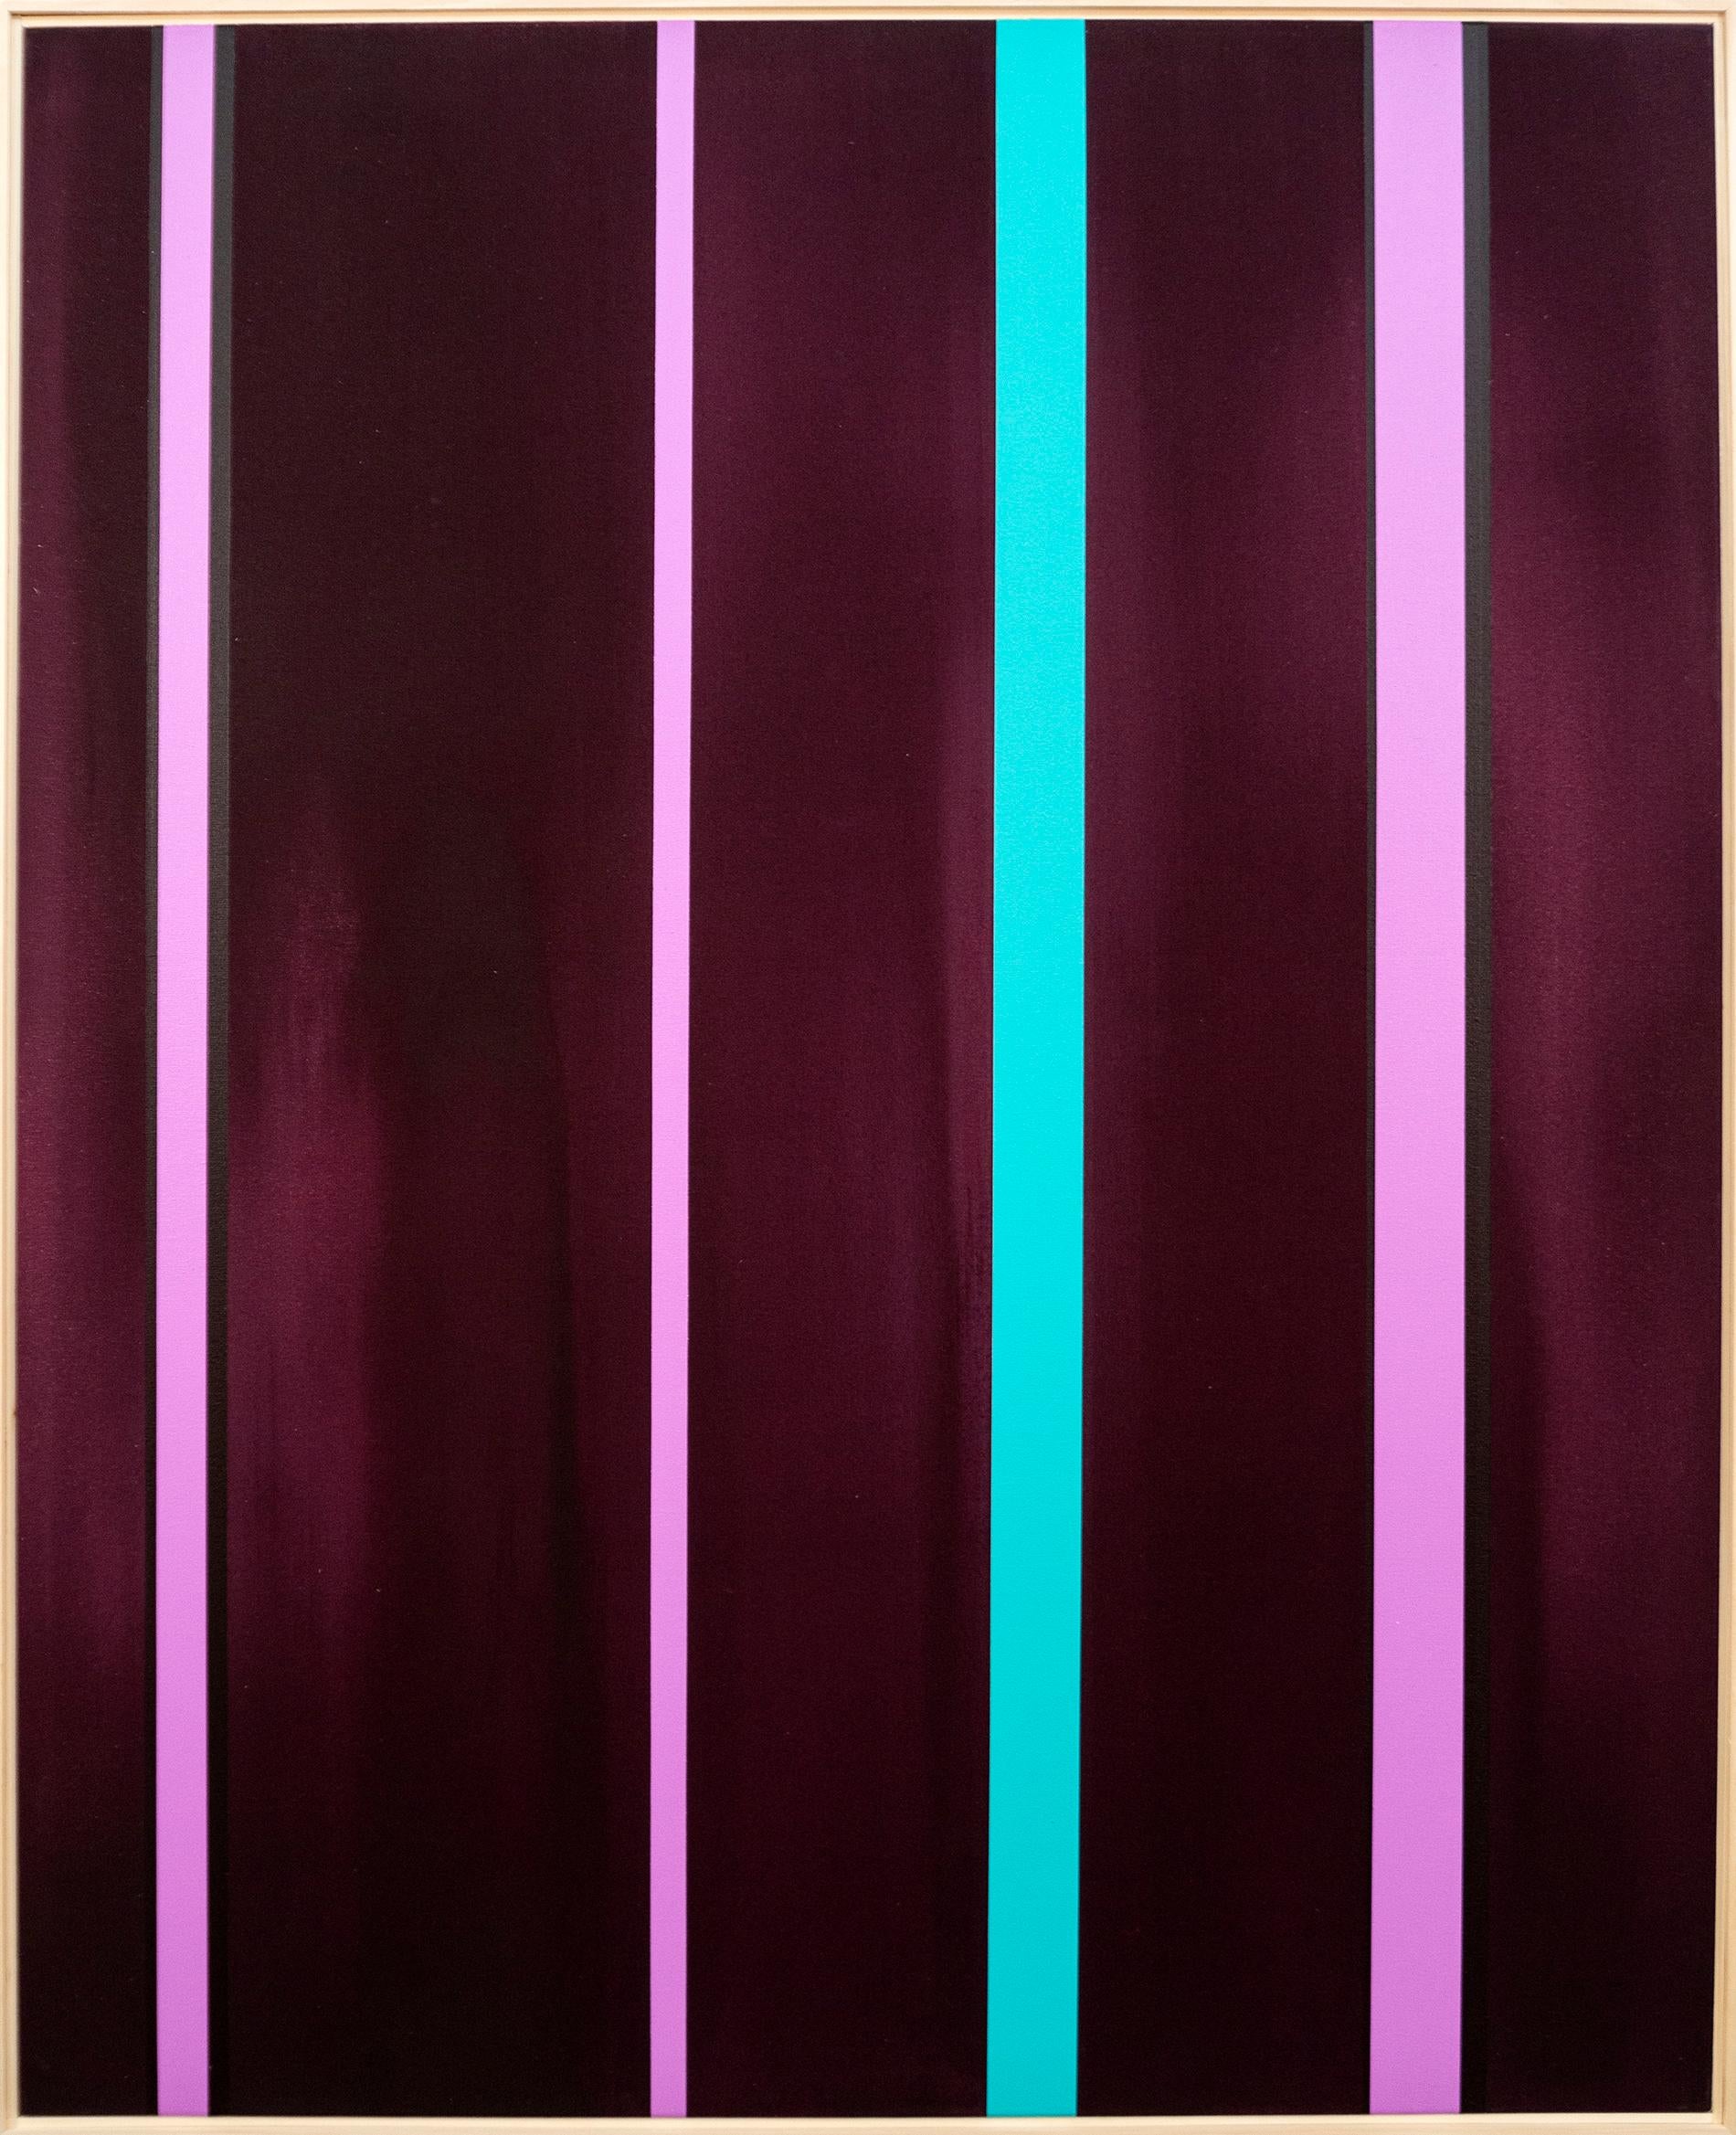 Intervals - large, black, blue, pink, contemporary abstract, acrylic on canvas - Painting by Milly Ristvedt